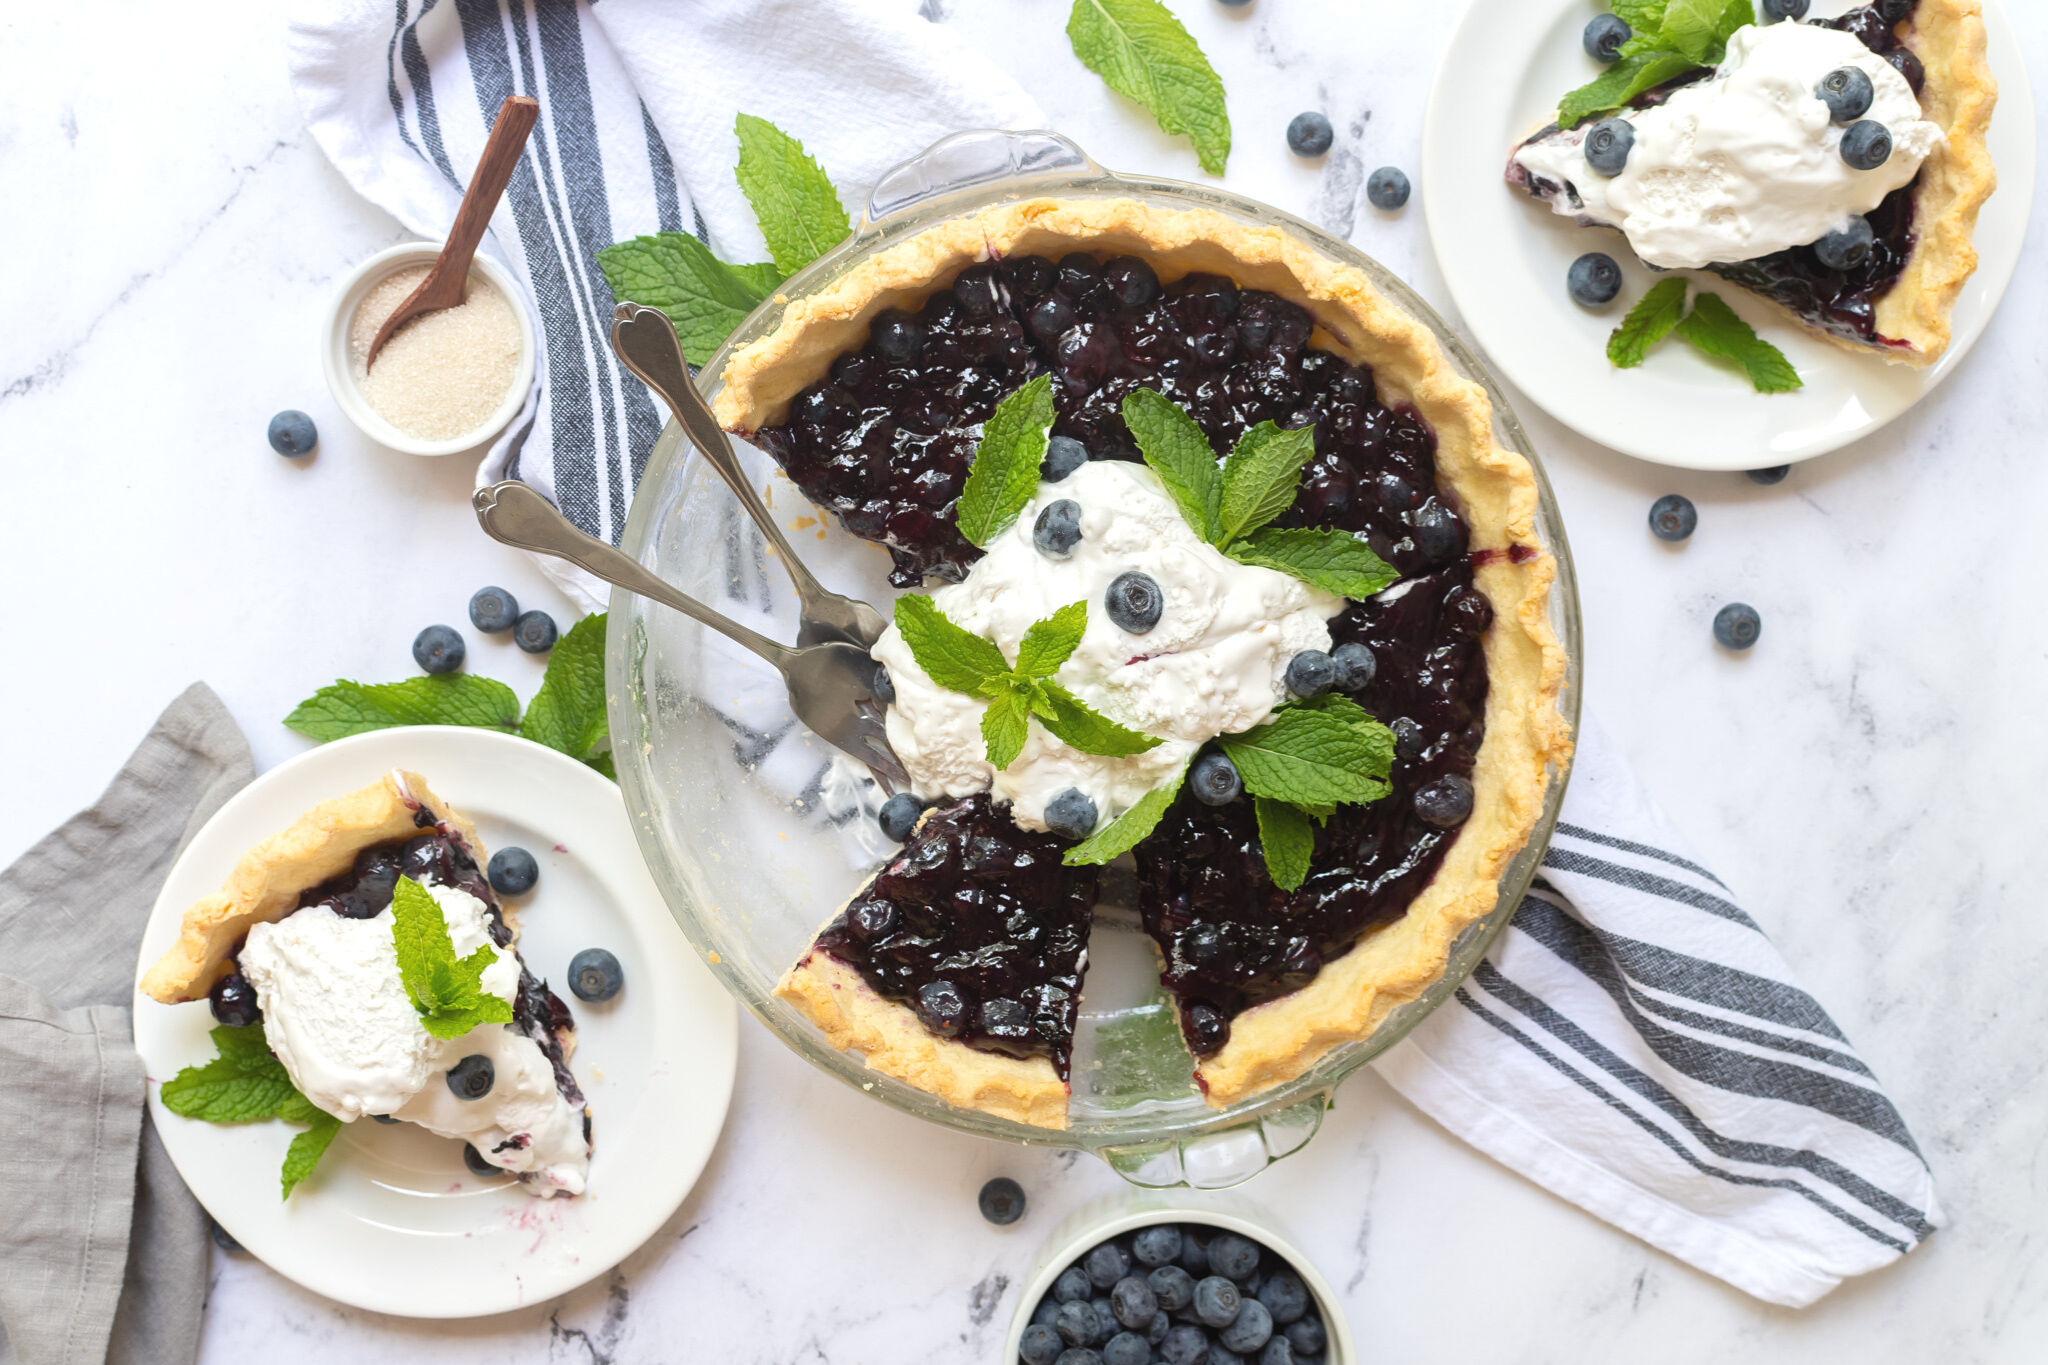 Beautiful flat lay bird-eye shot of a delicious fresh blueberry pie with two pieces cut out from it which are placed on separate plates next to the pie. The pie is topped with freshly whipped cream and mint leaves.